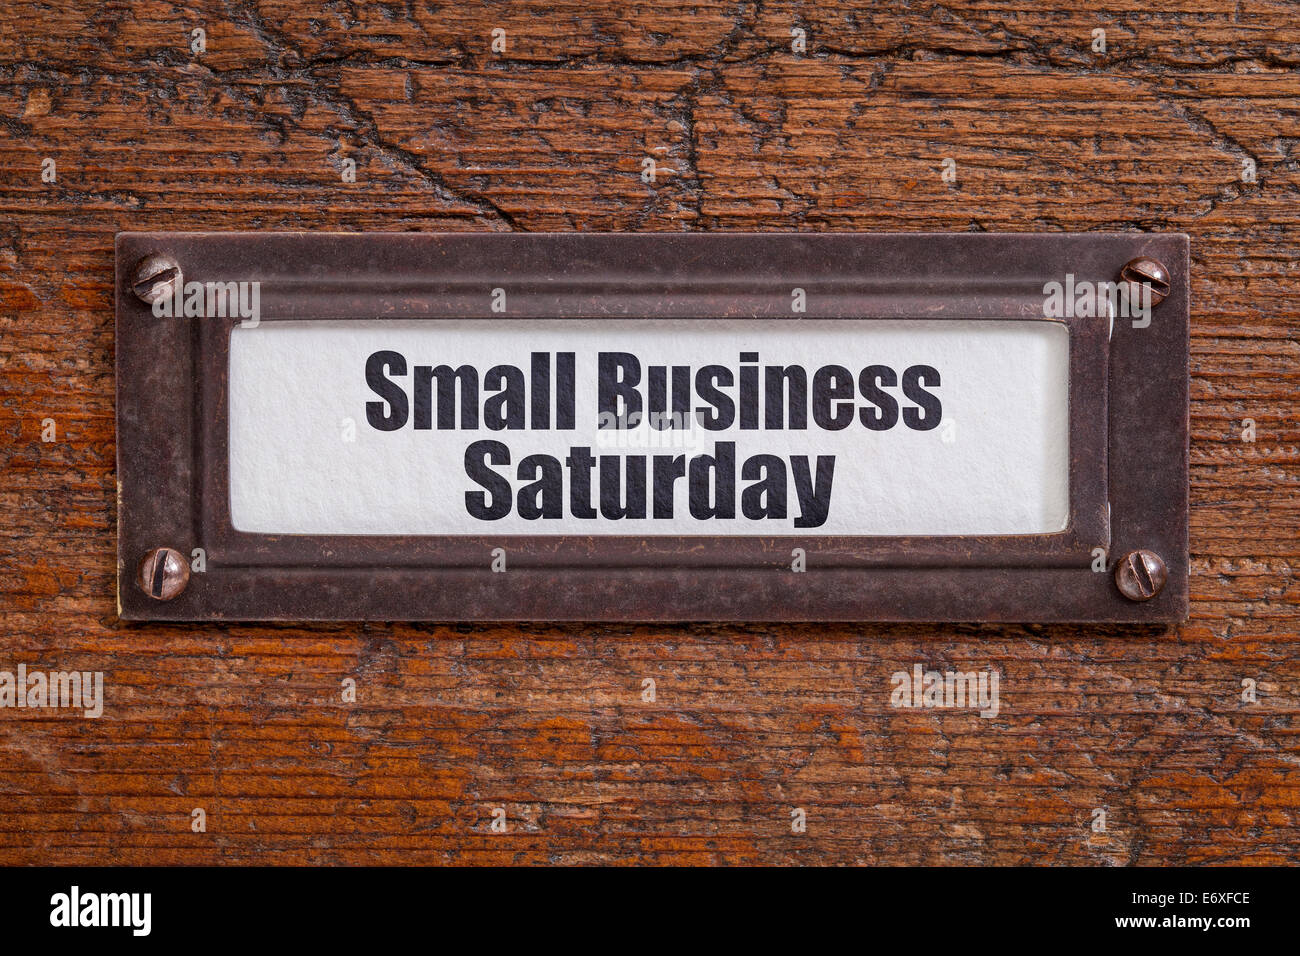 Small Business Saturday - file cabinet label, bronze holder against grunge and scratched wood Stock Photo